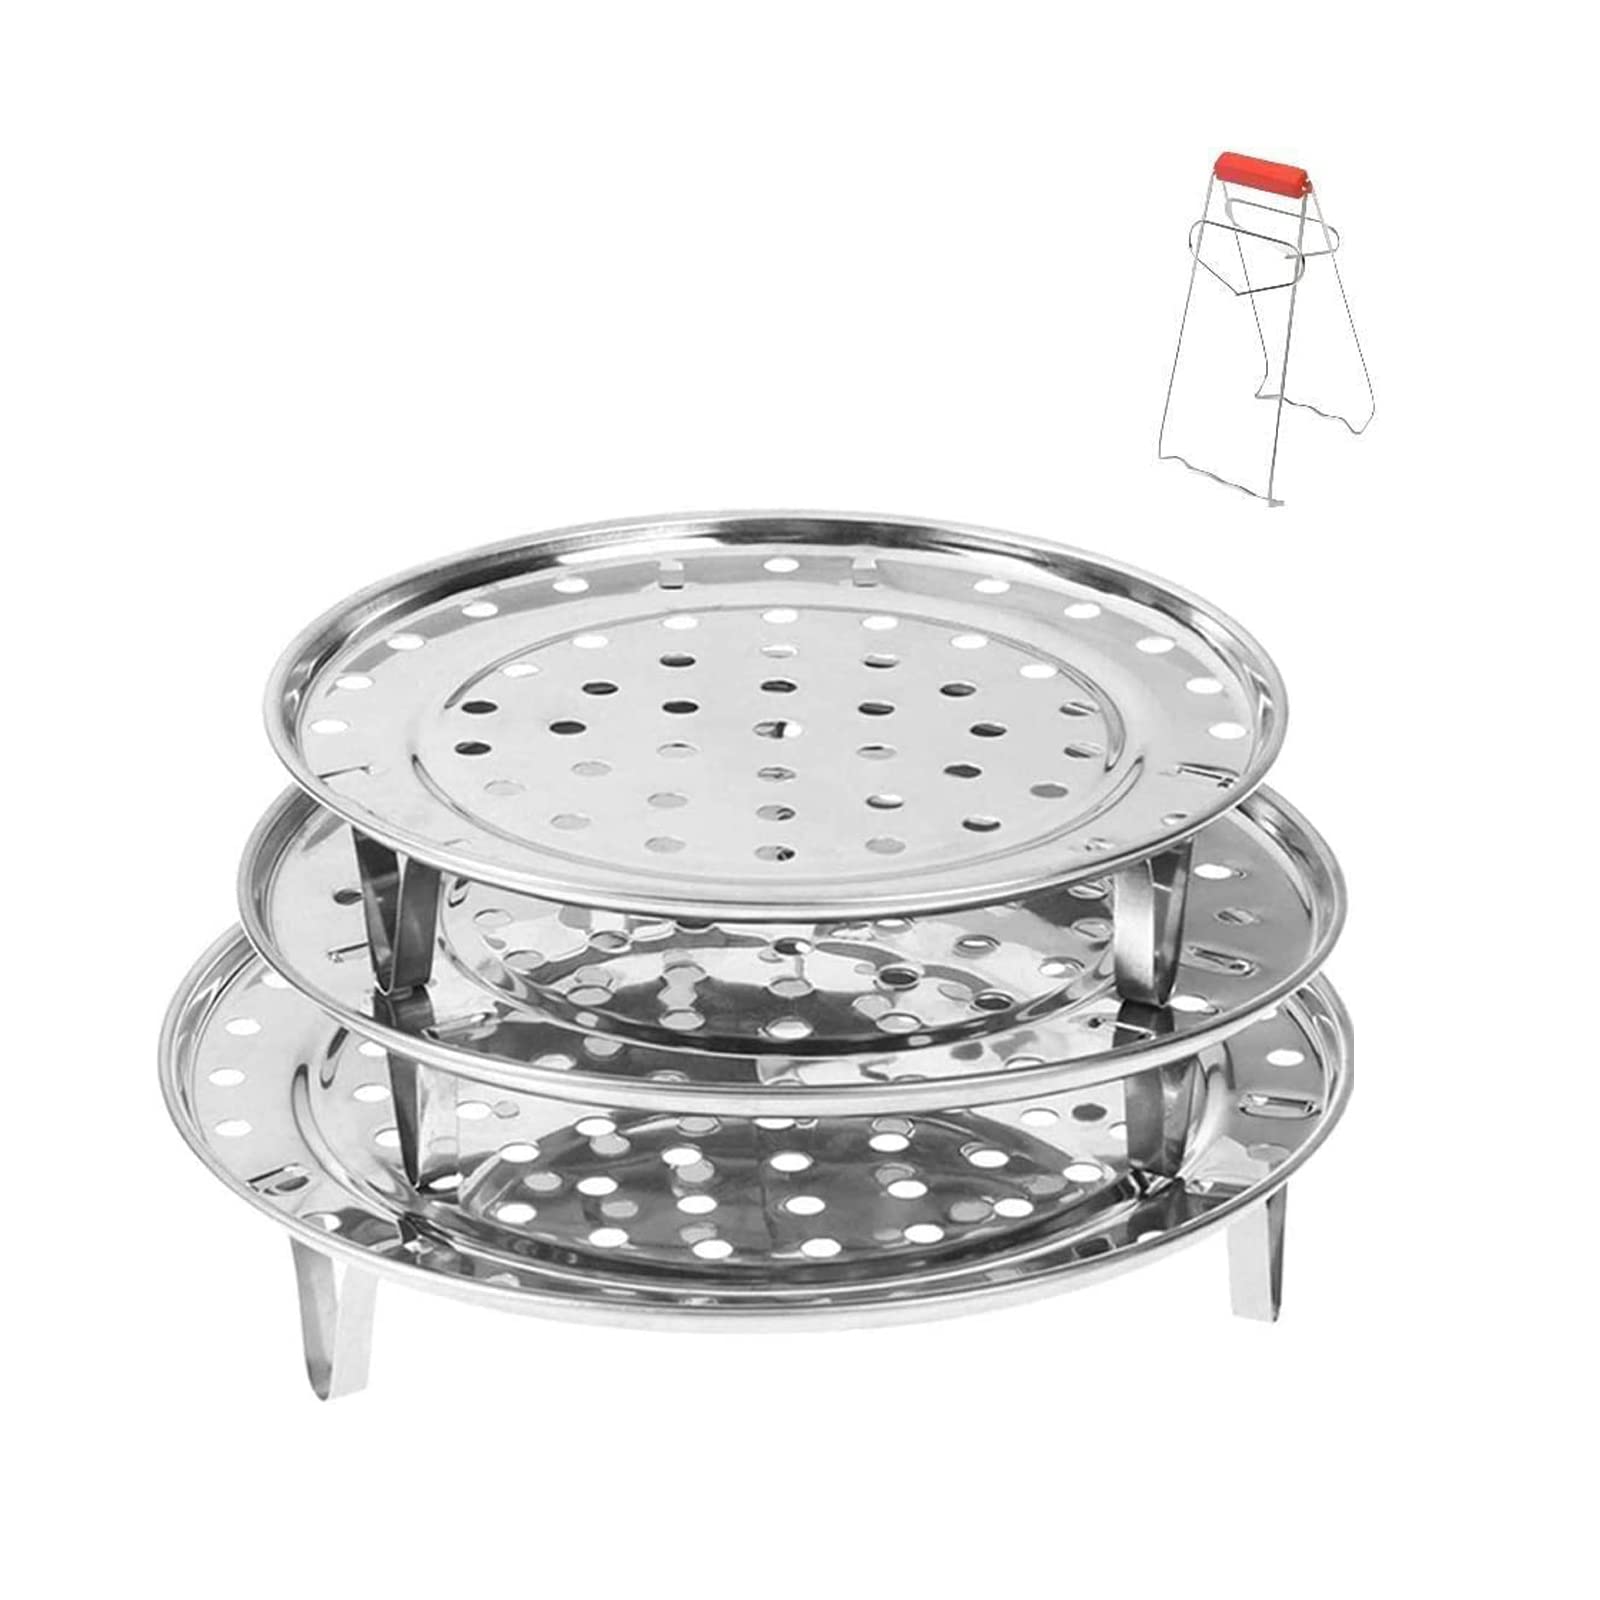 WANGYZJ Stainless Steel Steamer Rack, Steamer Rack for Pots, Round Cooking Rack, 3-Layer Steaming Rack for Kitchen (3pcs, 22-24-26), Silver